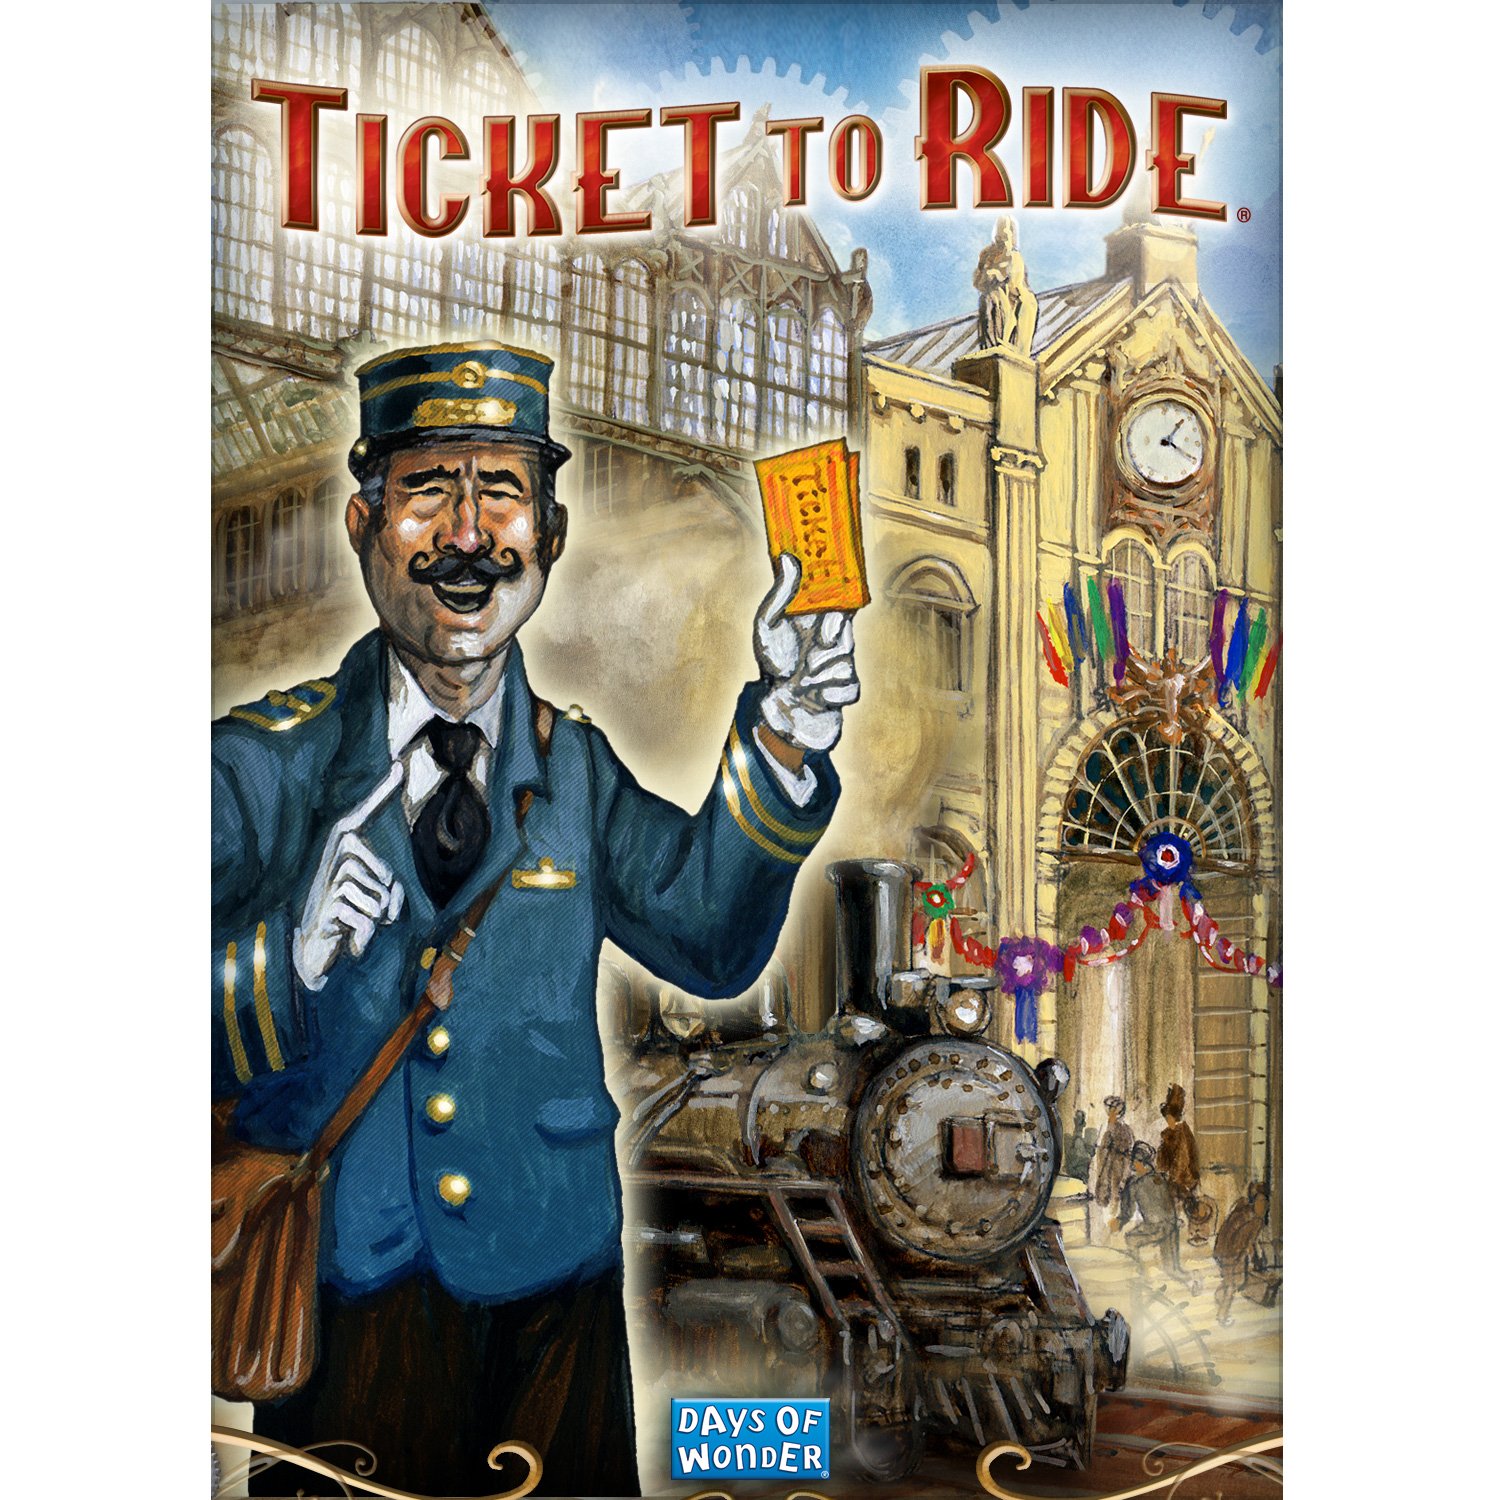 Ticket to ride usa rules